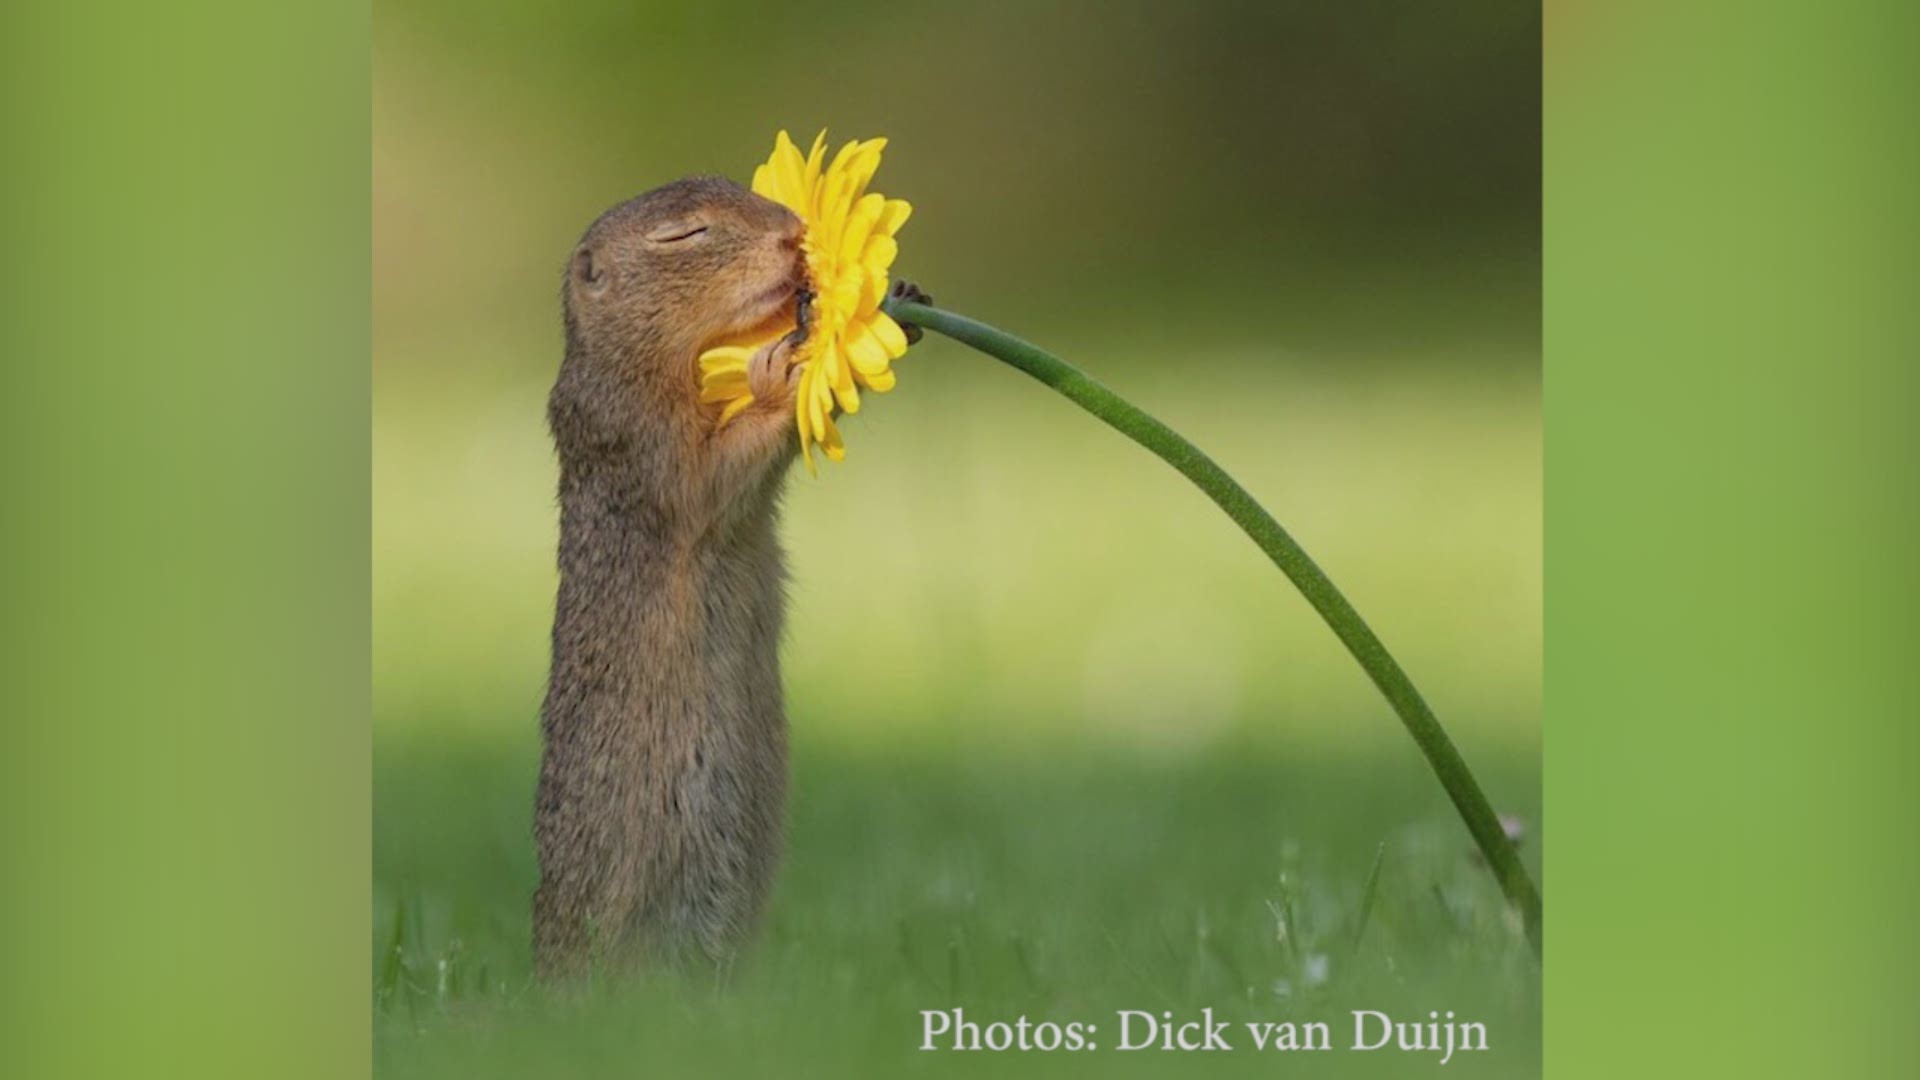 Nature photographer captures a squirrel smelling a flower in now-viral photo